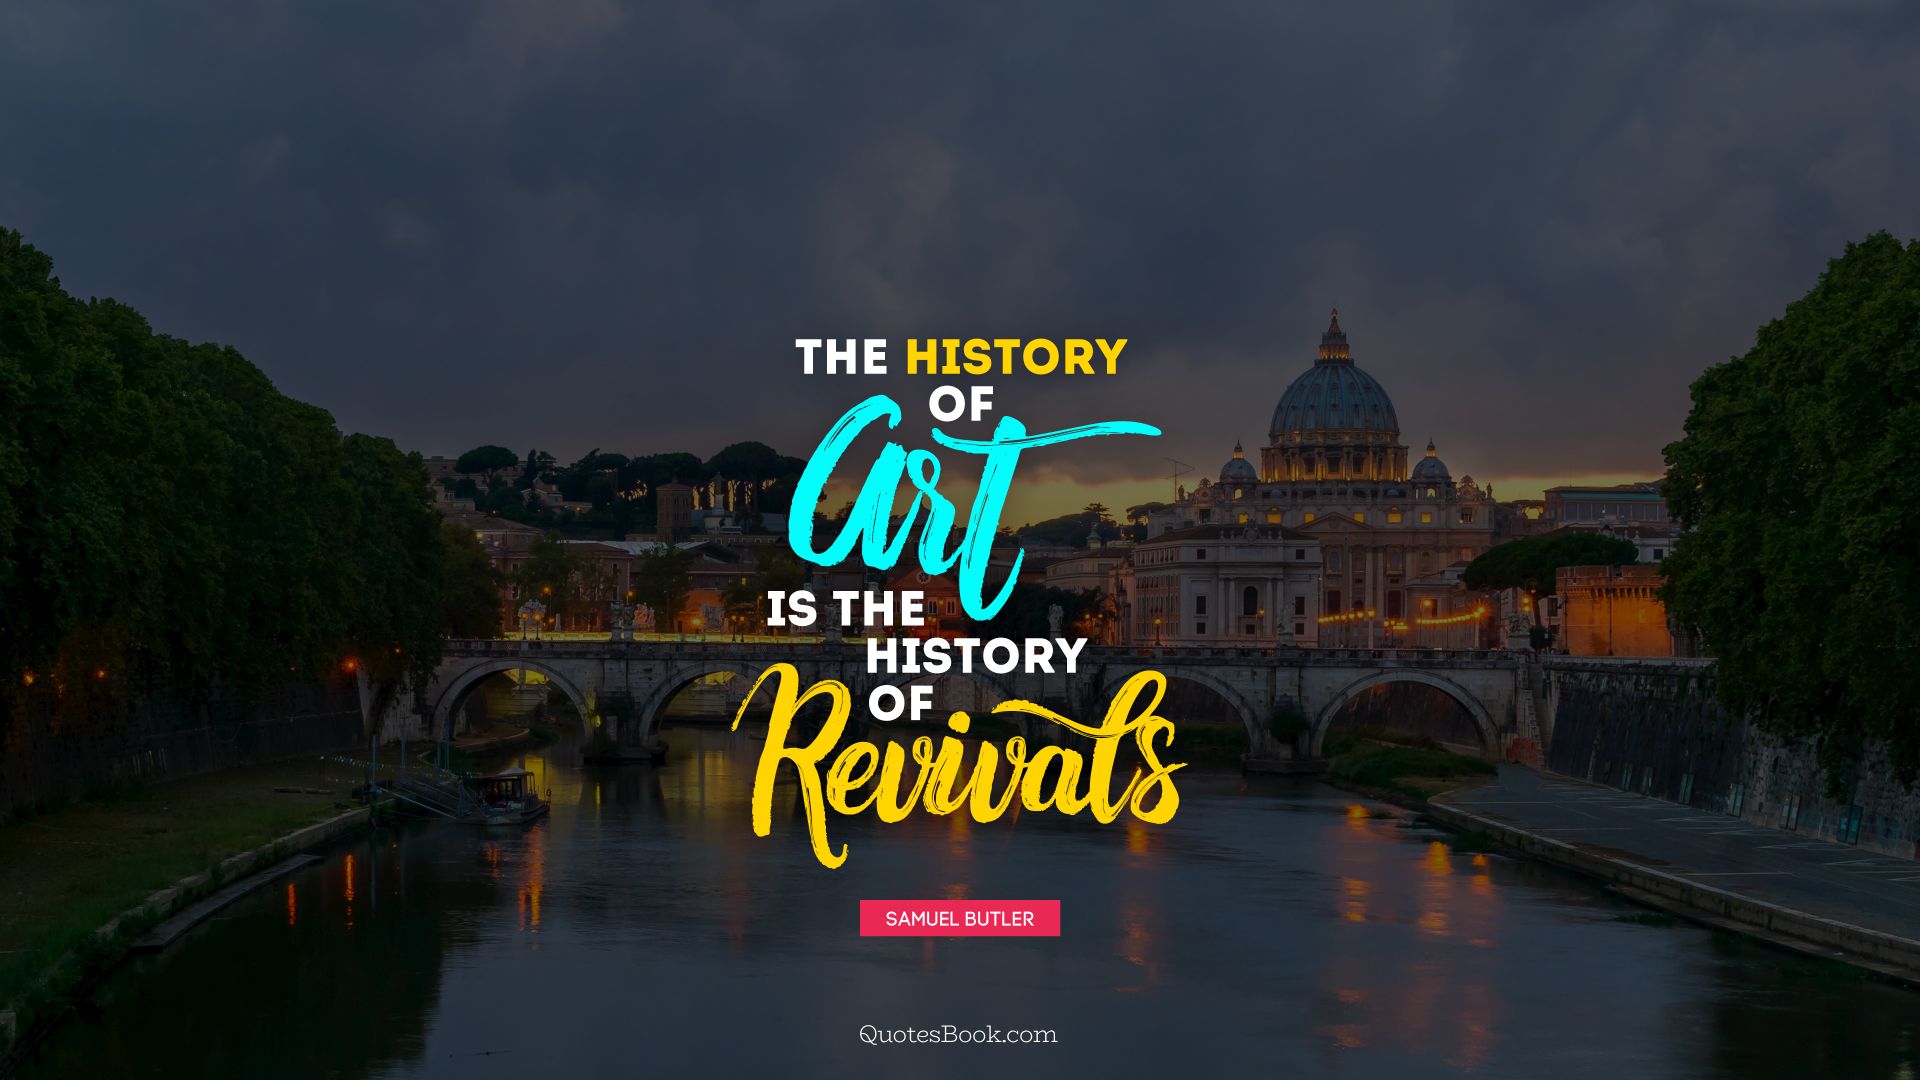 The history of art is the history of revivals  . - Quote by Samuel Butler